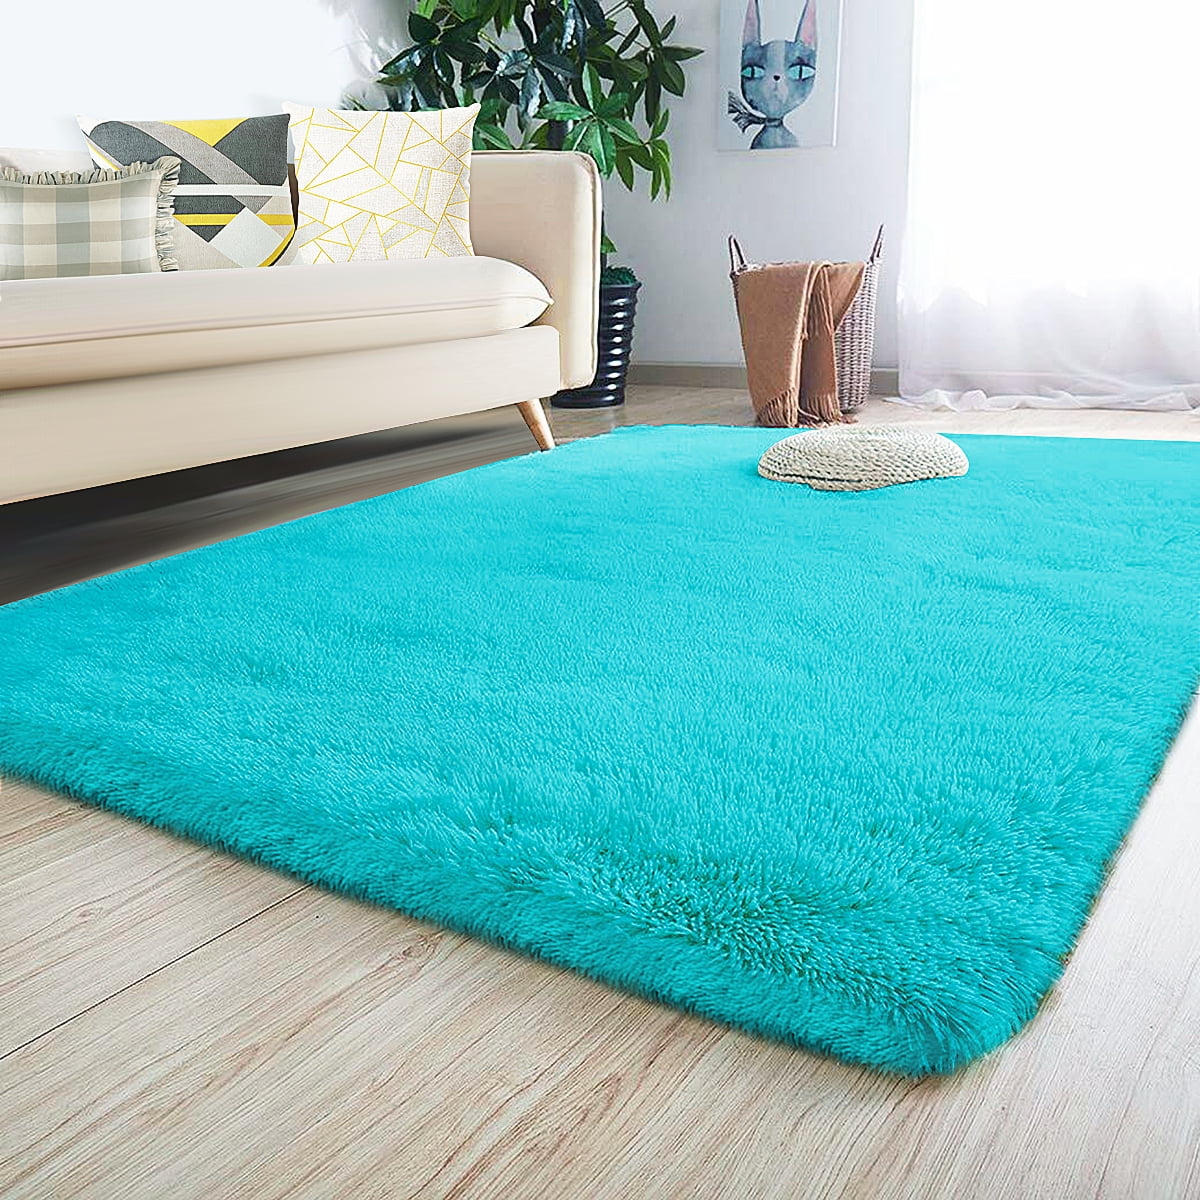 Fluffy Rugs Anti-Skid thick Shaggy Area  Dining Home Room Bedroom Carpet 